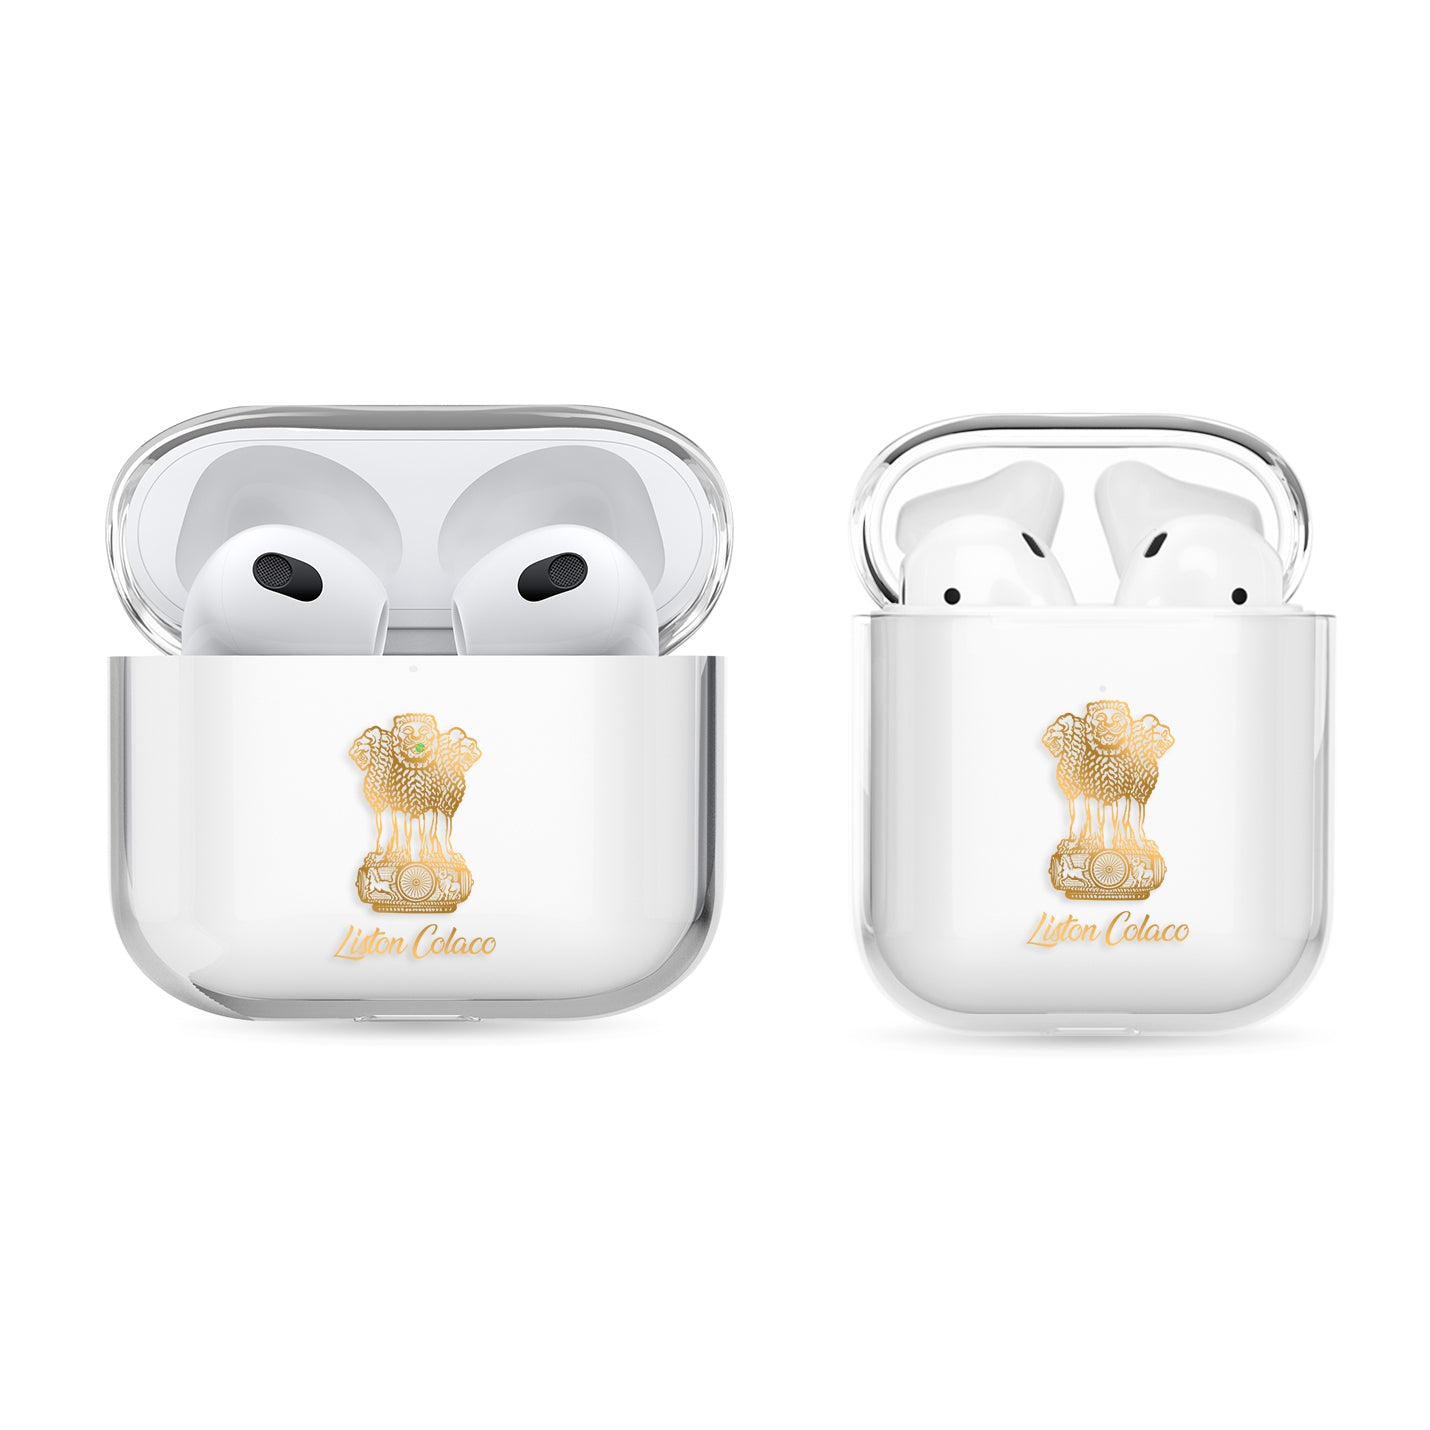 Airpods Hülle - Indien - 1instaphone